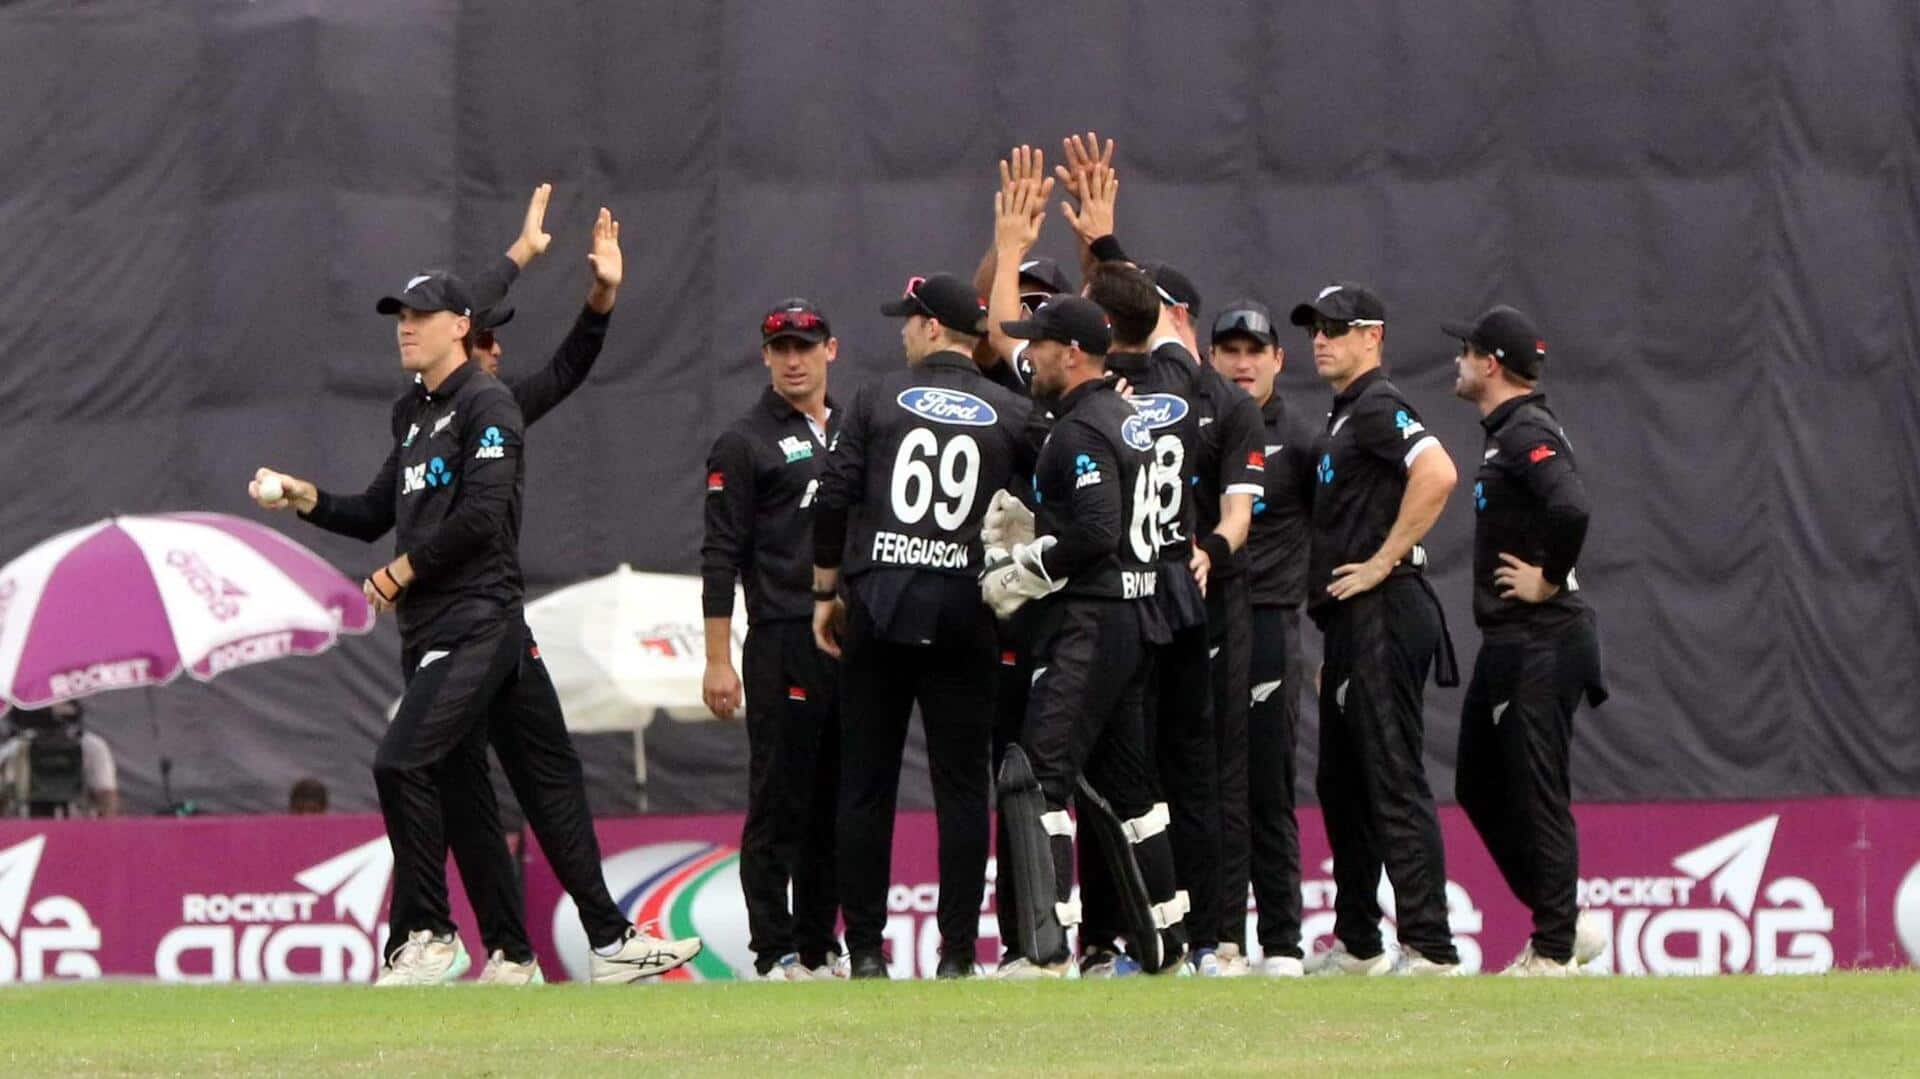 New Zealand defeat Bangladesh by seven wickets to wrap up the ODI series